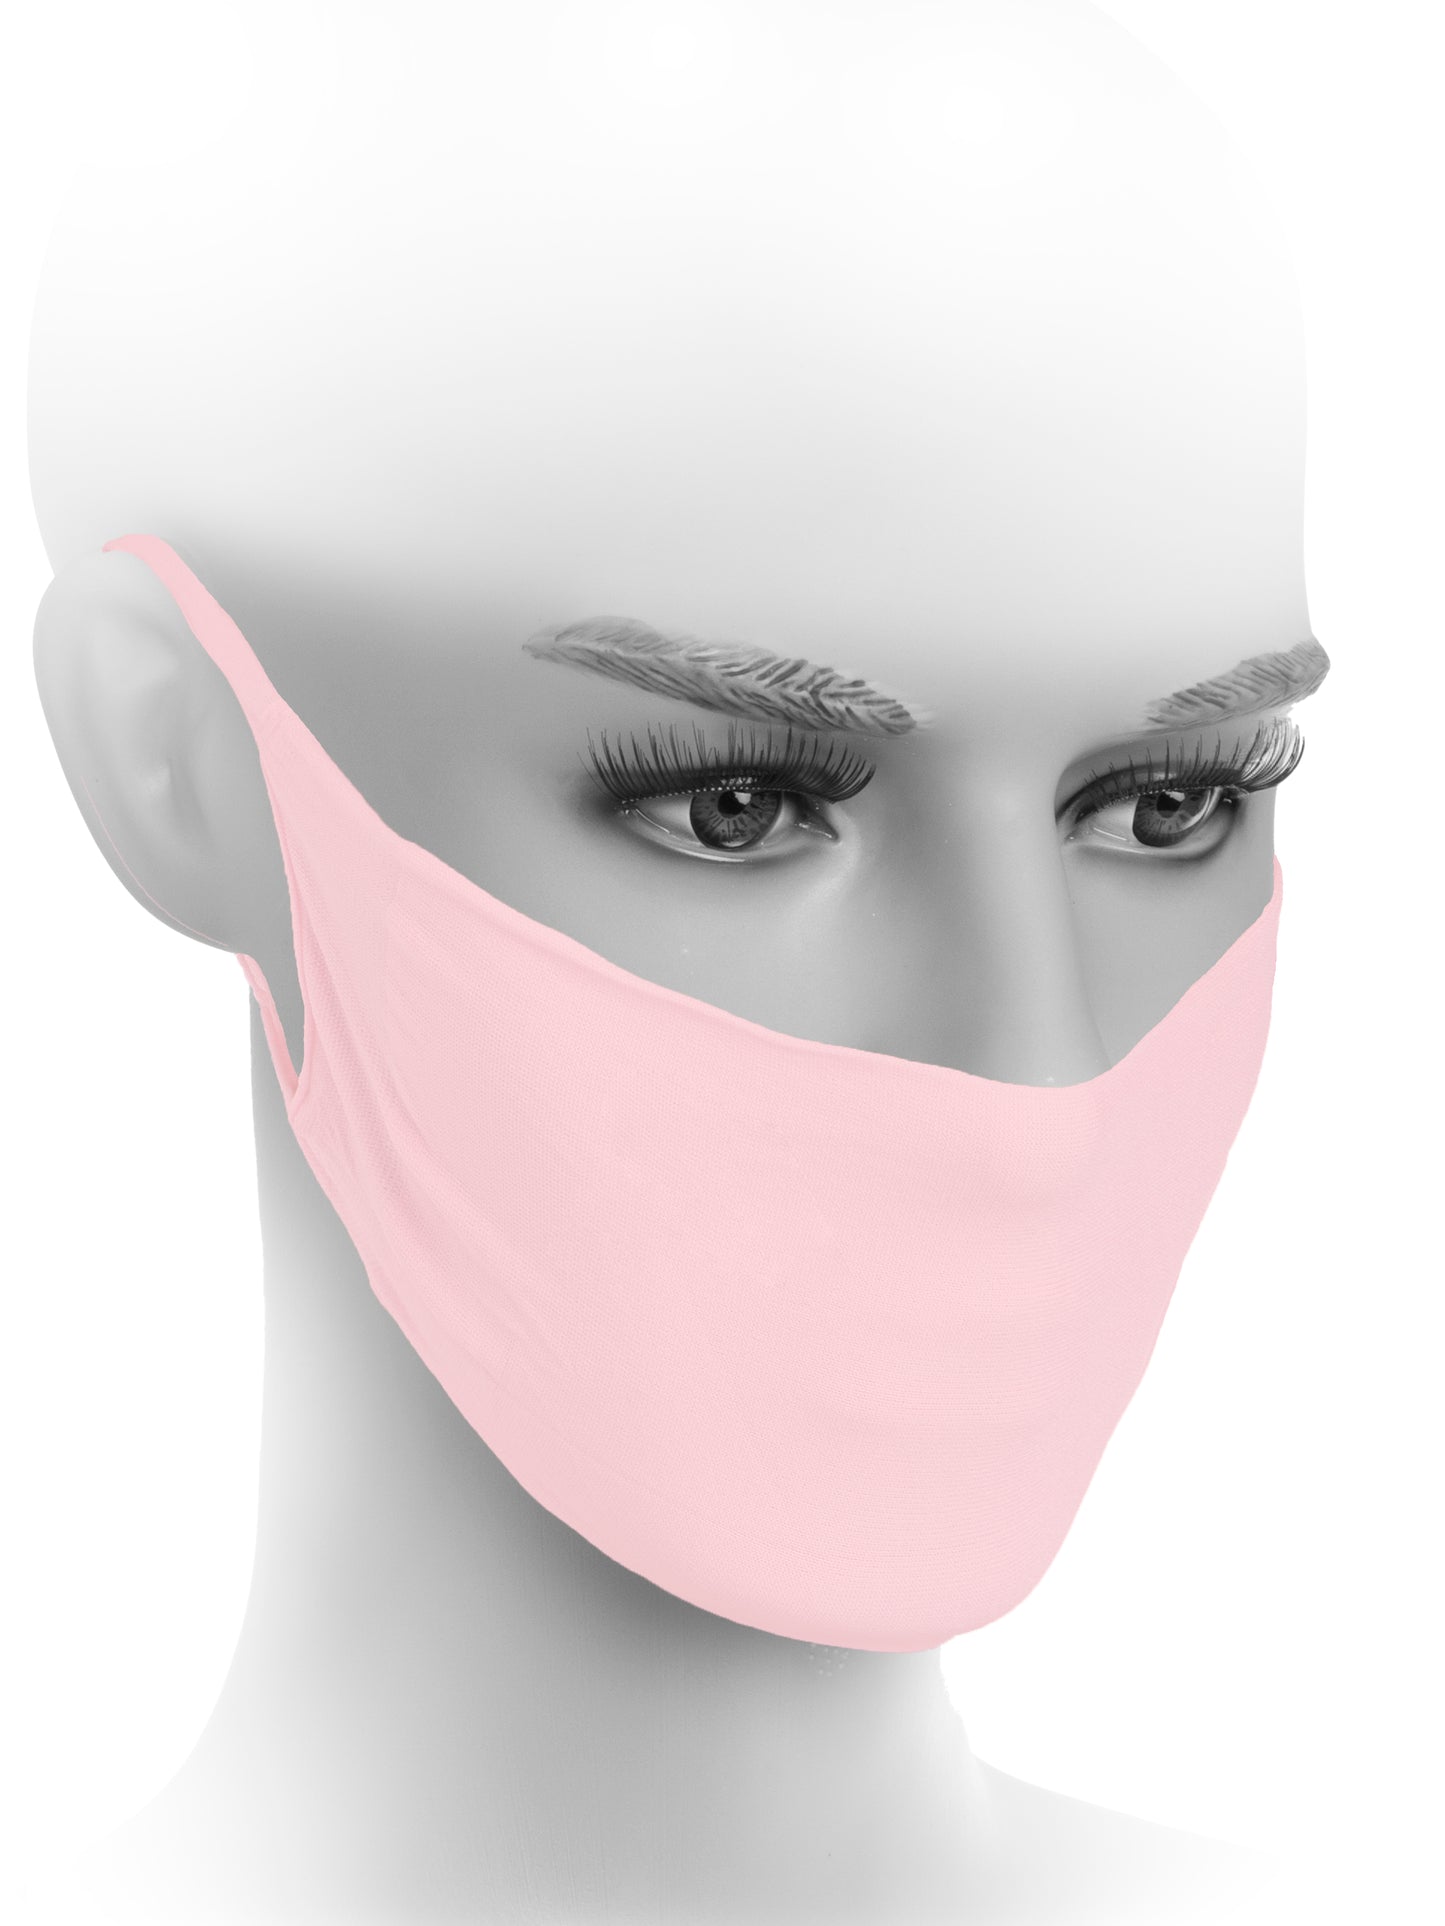 Fiore Hygiene Face Mask M0001 - face covering in light pink